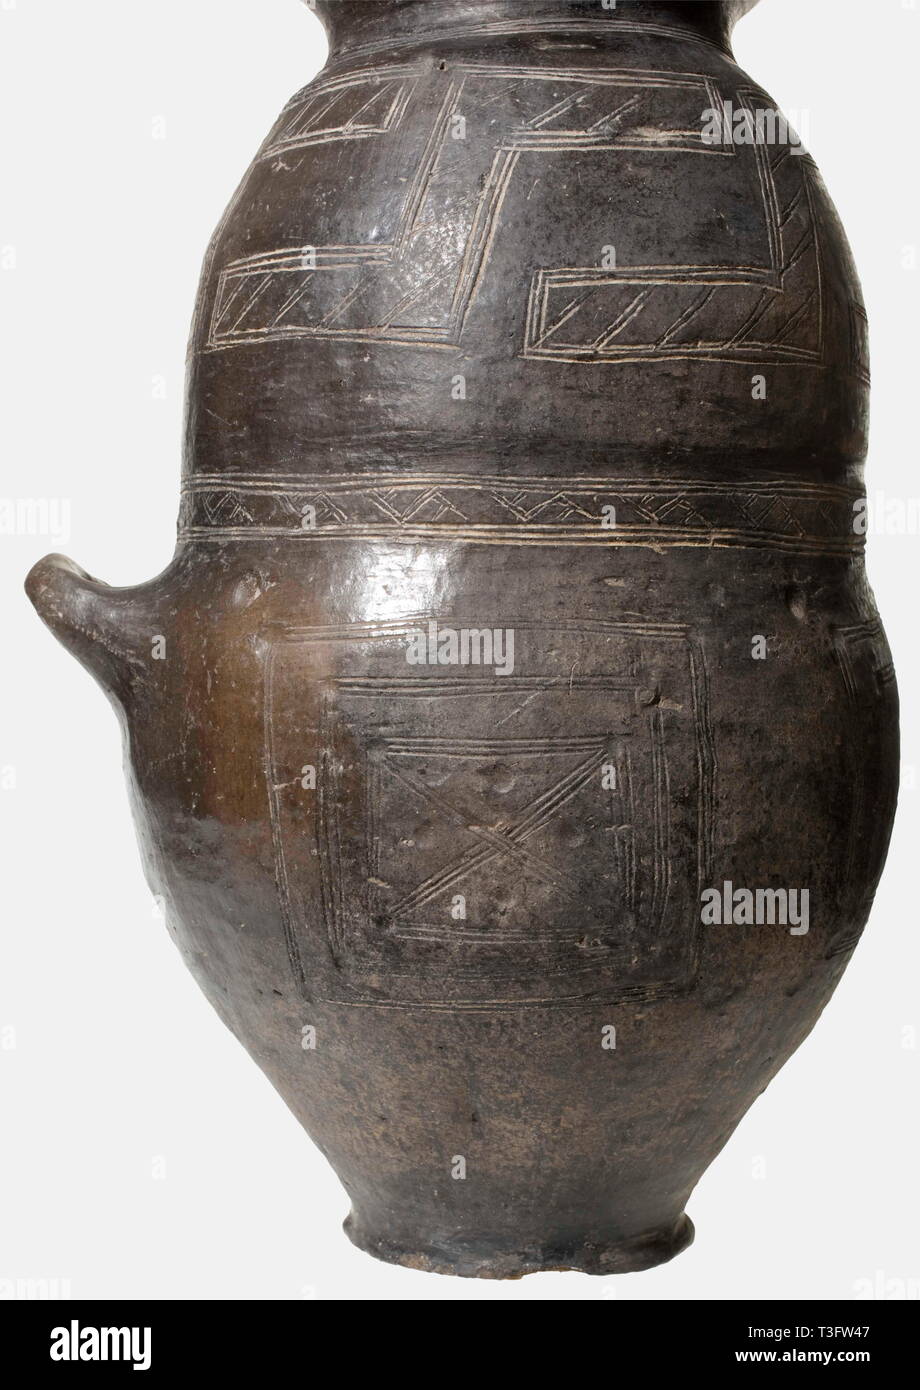 A cinerary urn with a helmet lid, Villanova, 9th/8th century B.C. Dark brown to black clay. One-handle urn with a constricted top and a strongly flaring rim. The surfaces have scratched and whitened geometric decoration: rectangular fields, swastikas, bands with hatched Z patterns, and bands of crosses. The helmet lid has a high sculpted crest, and decorative crosshatched bands along the lower edge. Height of the urn 39 cm. Height of the helmet 25 cm. Very good condition. Small improvements to the rim of the vessel, the helmet point, and the base, Additional-Rights-Clearance-Info-Not-Available Stock Photo